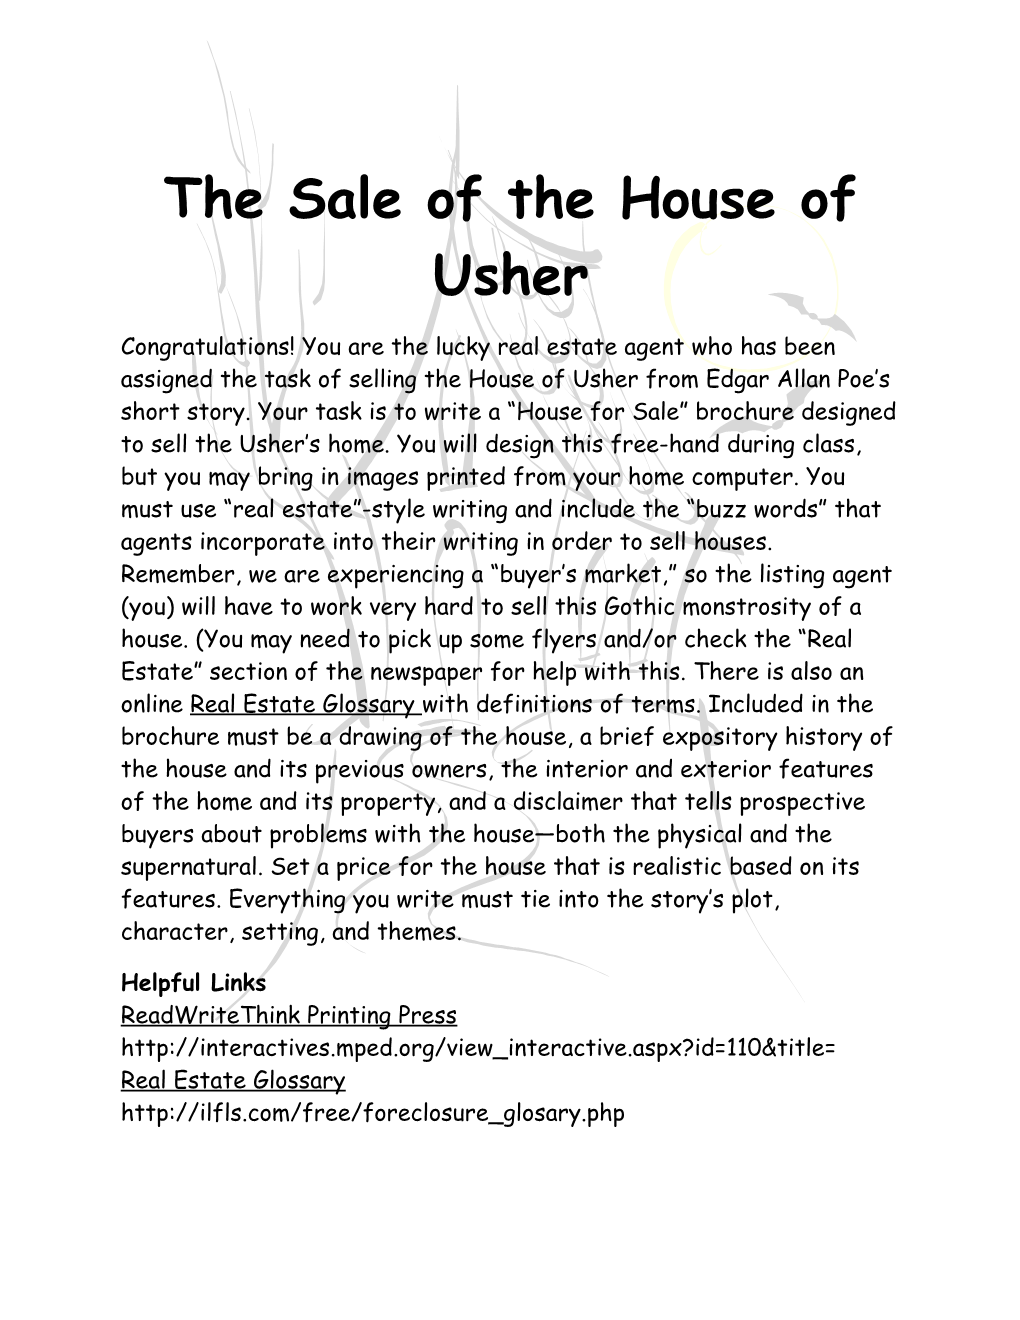 The Sale of the House of Usher